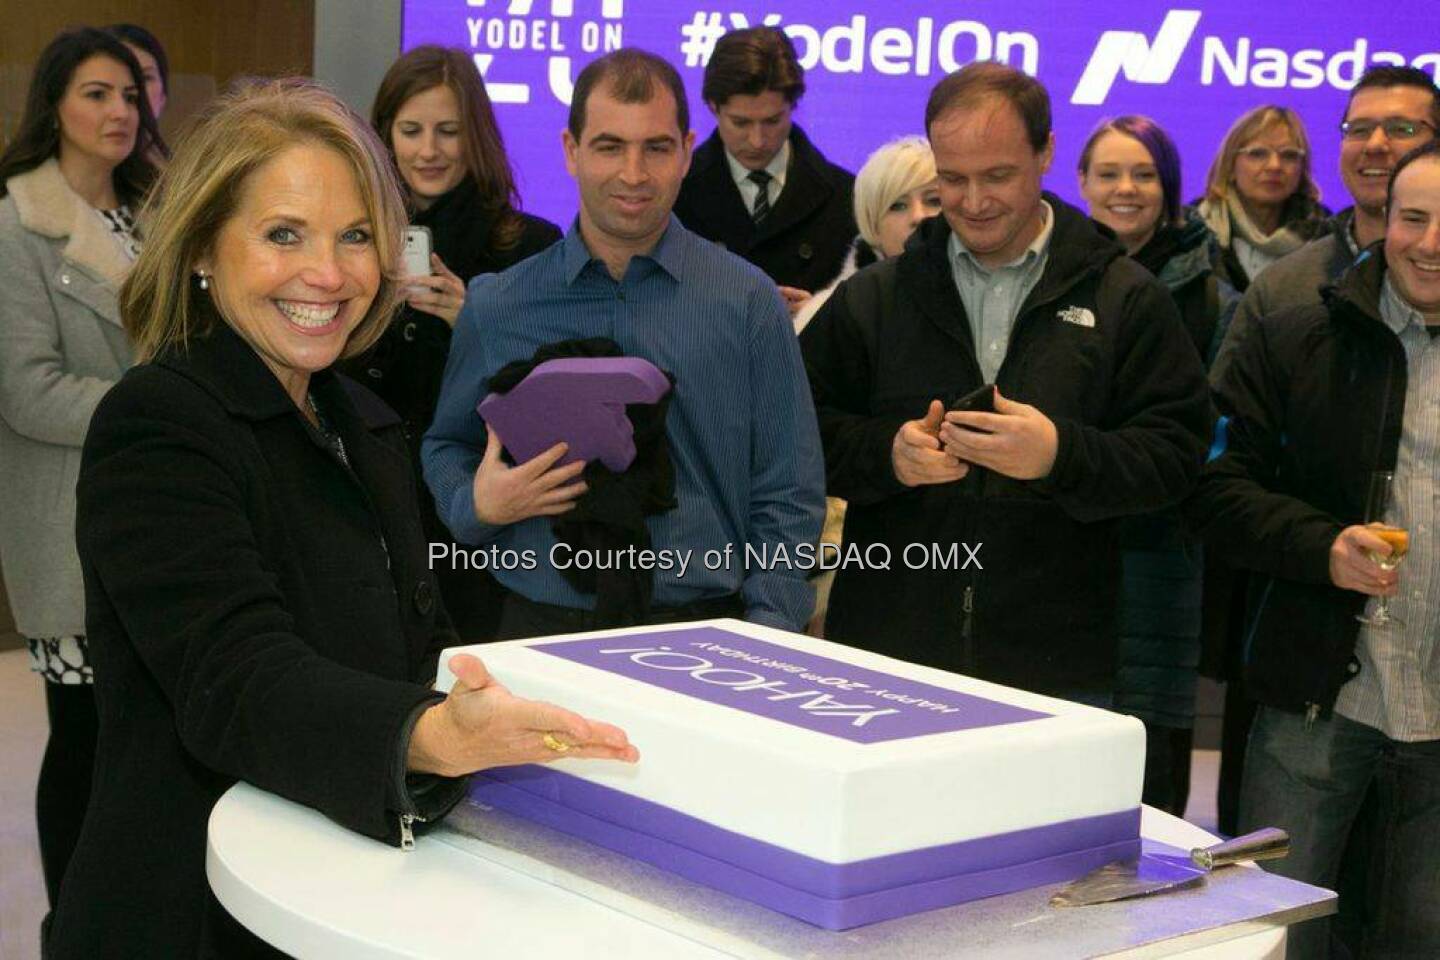 Huge thanks to Yahoo for coming to celebrate their 20th Anniversary with all of us here at Nasdaq. Happy birthday! Our CFO Kenneth Goldman opened the Nasdaq today with our fabulous editorial team and our friends Tumblr, BrightRoll and more! Source: http://facebook.com/NASDAQ